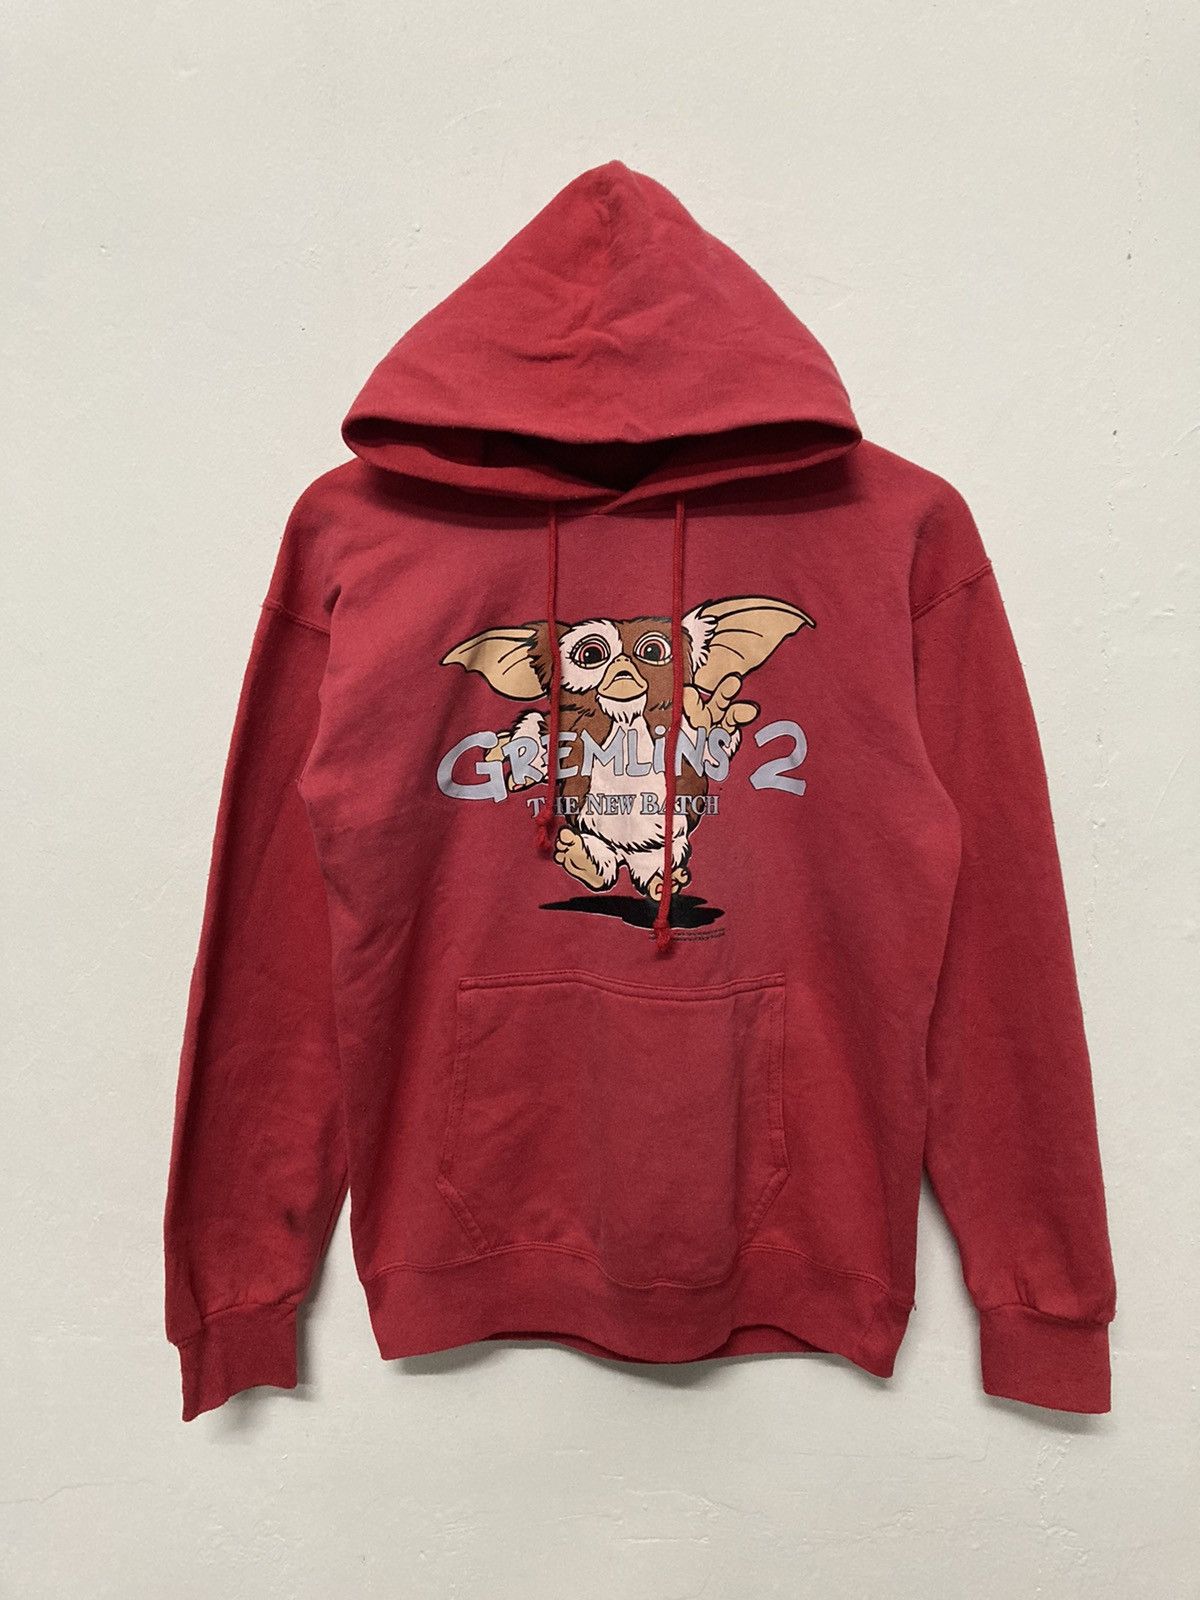 Vintage 1996 Gremlins 2 The New Batch Sun faded Hoodie - 1